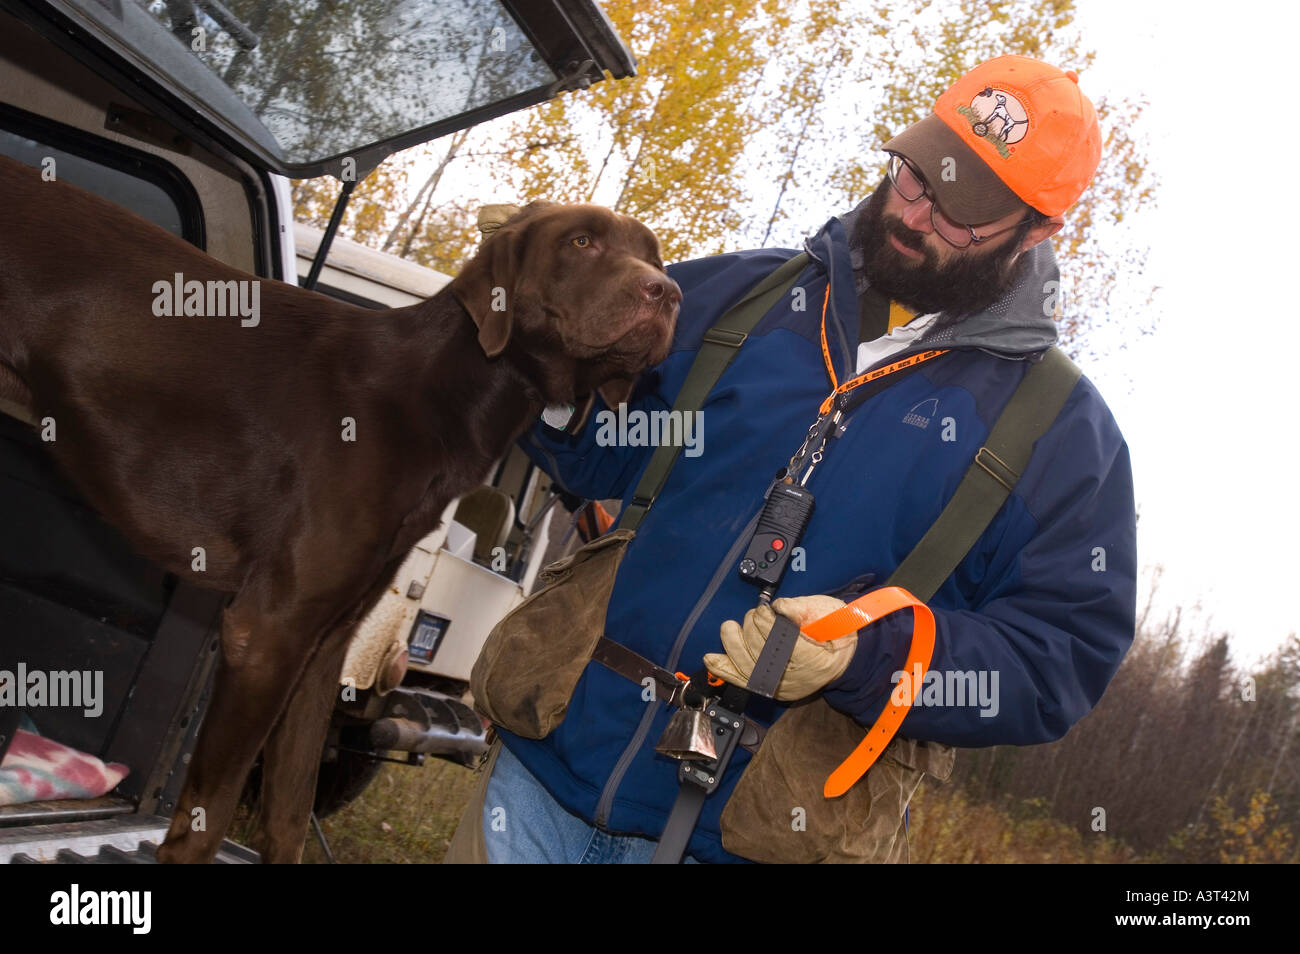 A hunter puts a collar on his chocolate pointing labrador retriever prior to hunting grouse and woodcock near Gwinn Michigan Stock Photo